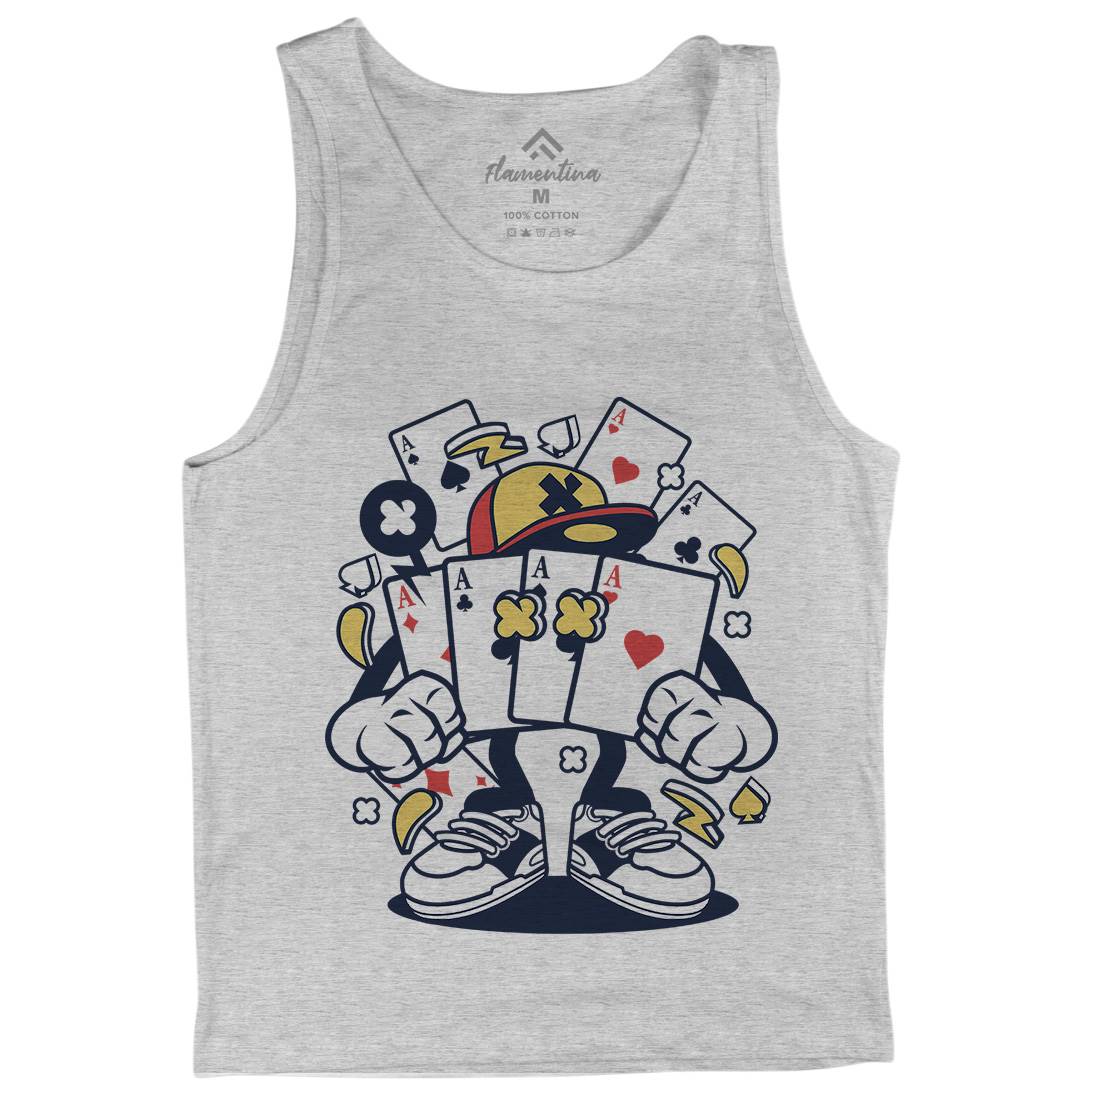 Playing Card Mens Tank Top Vest Sport C193